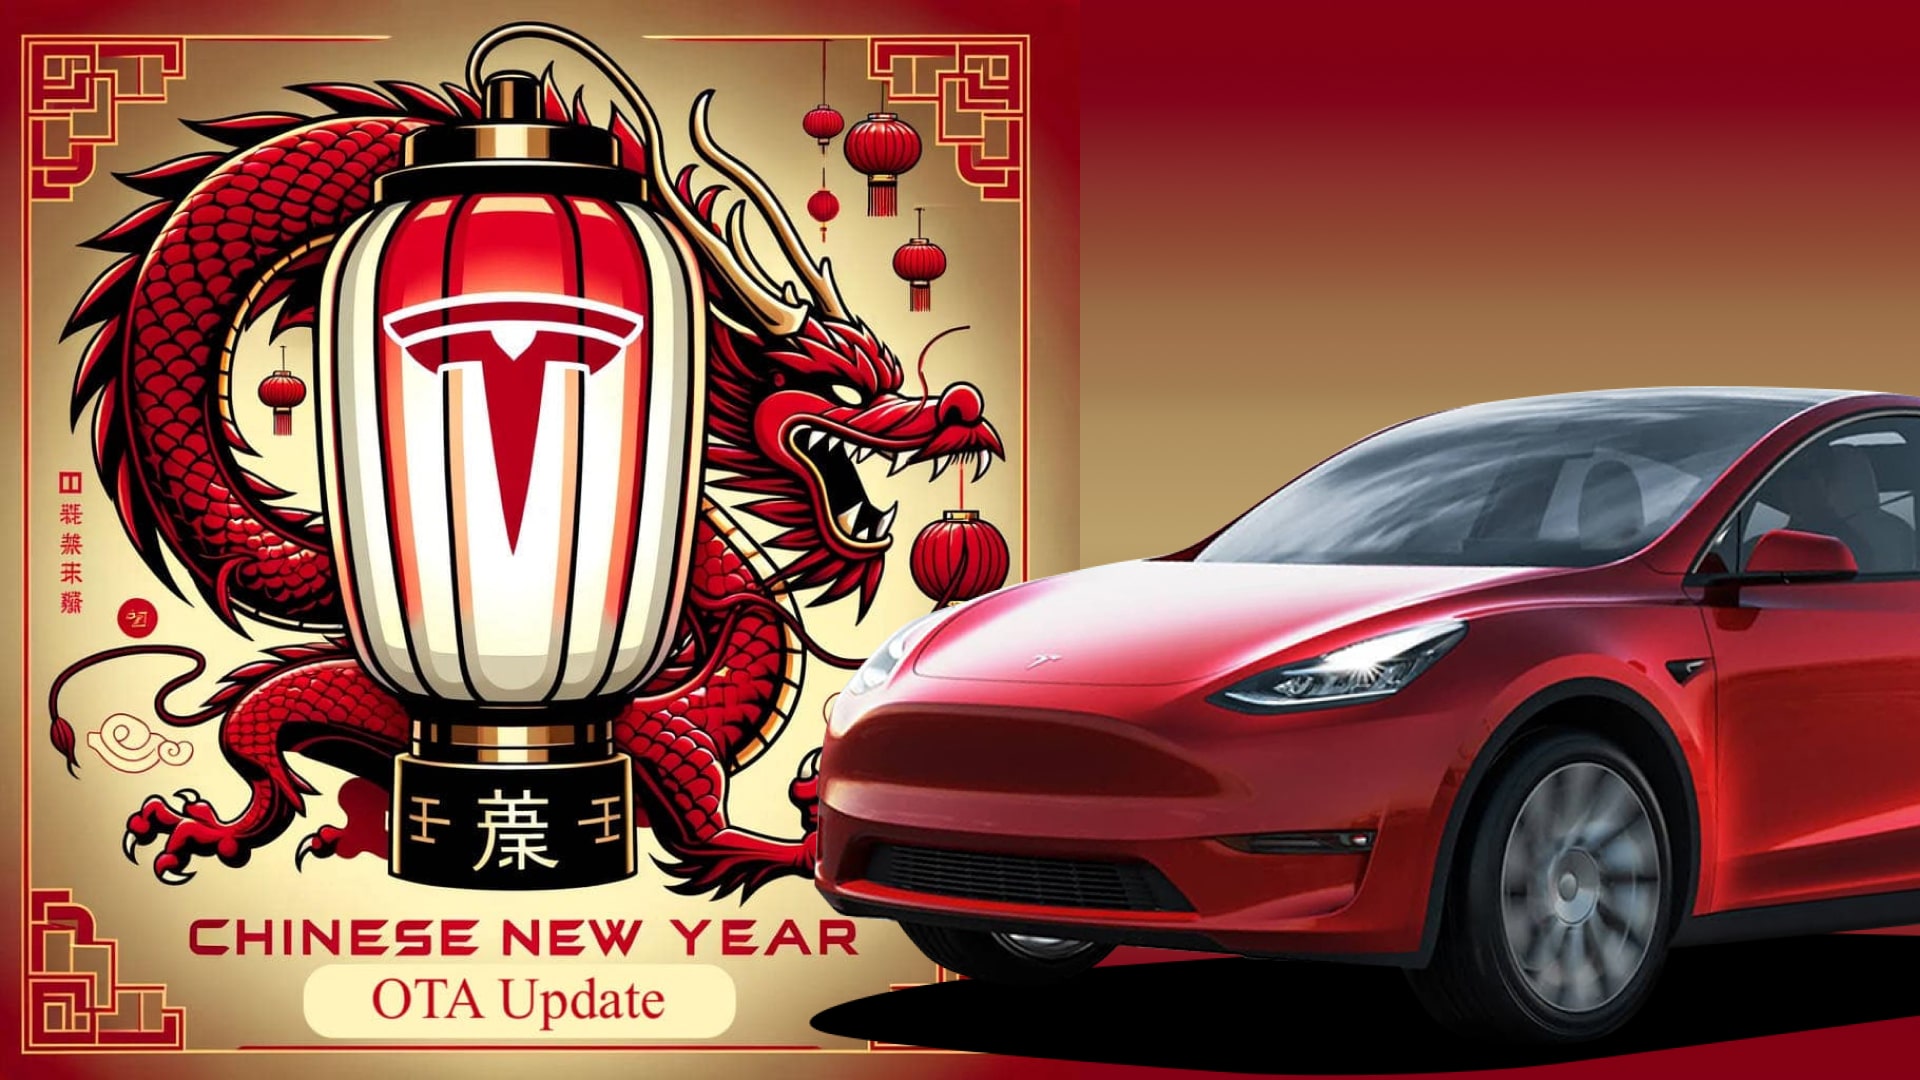 Tesla introduces special Chinese New Year OTA update